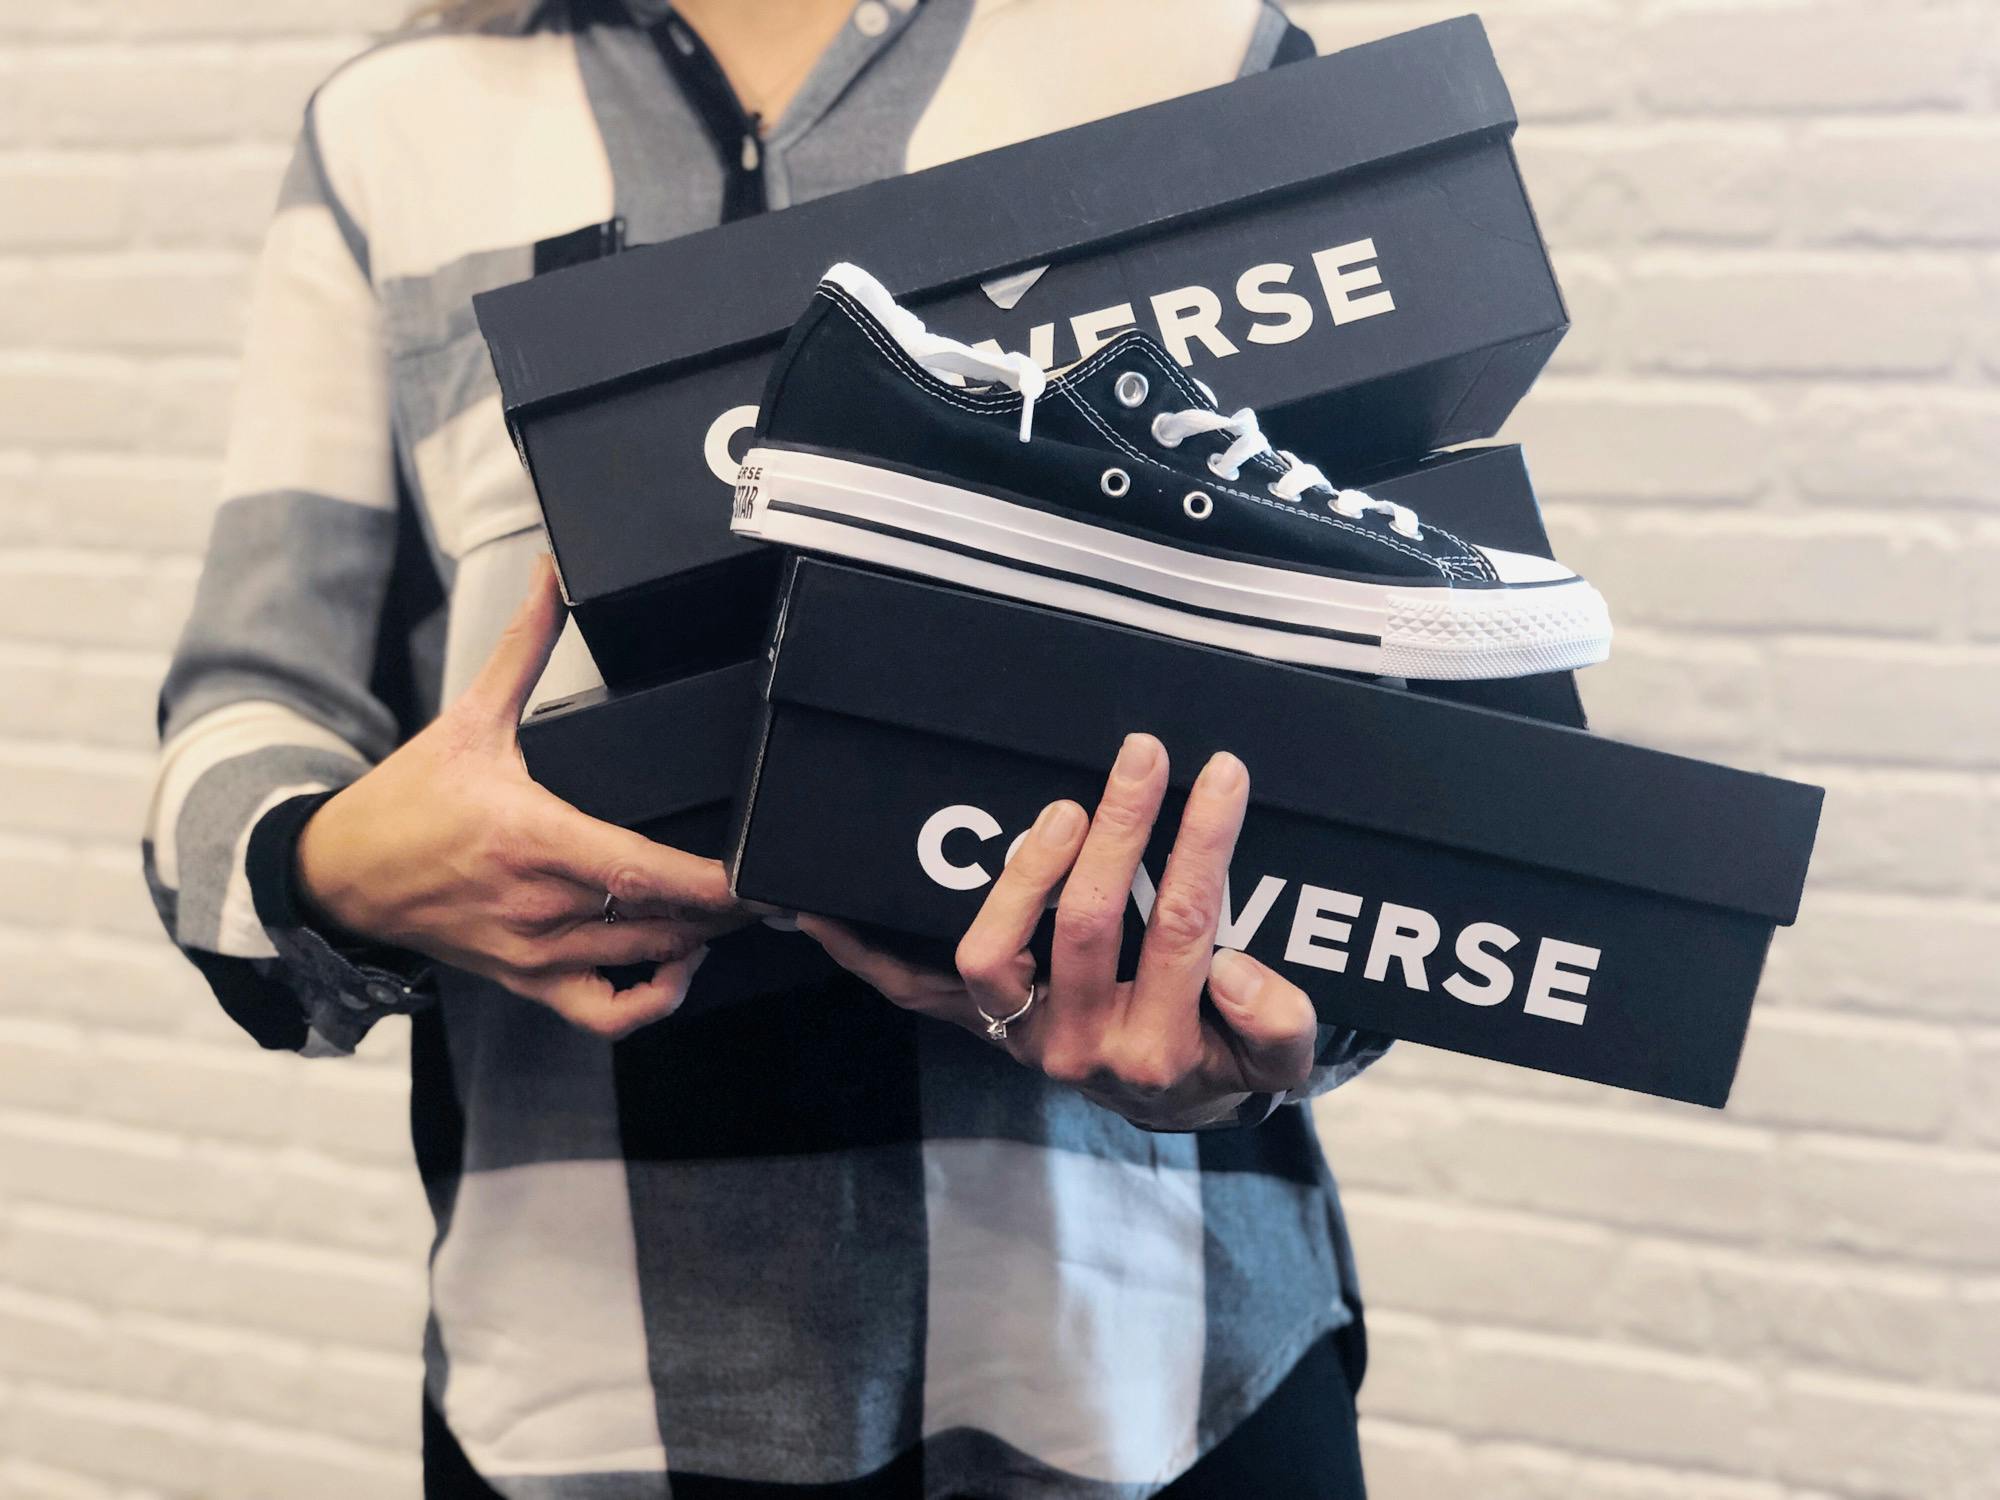 15 Converse Sales and Tricks To Get All The Deals - The Krazy Coupon Lady